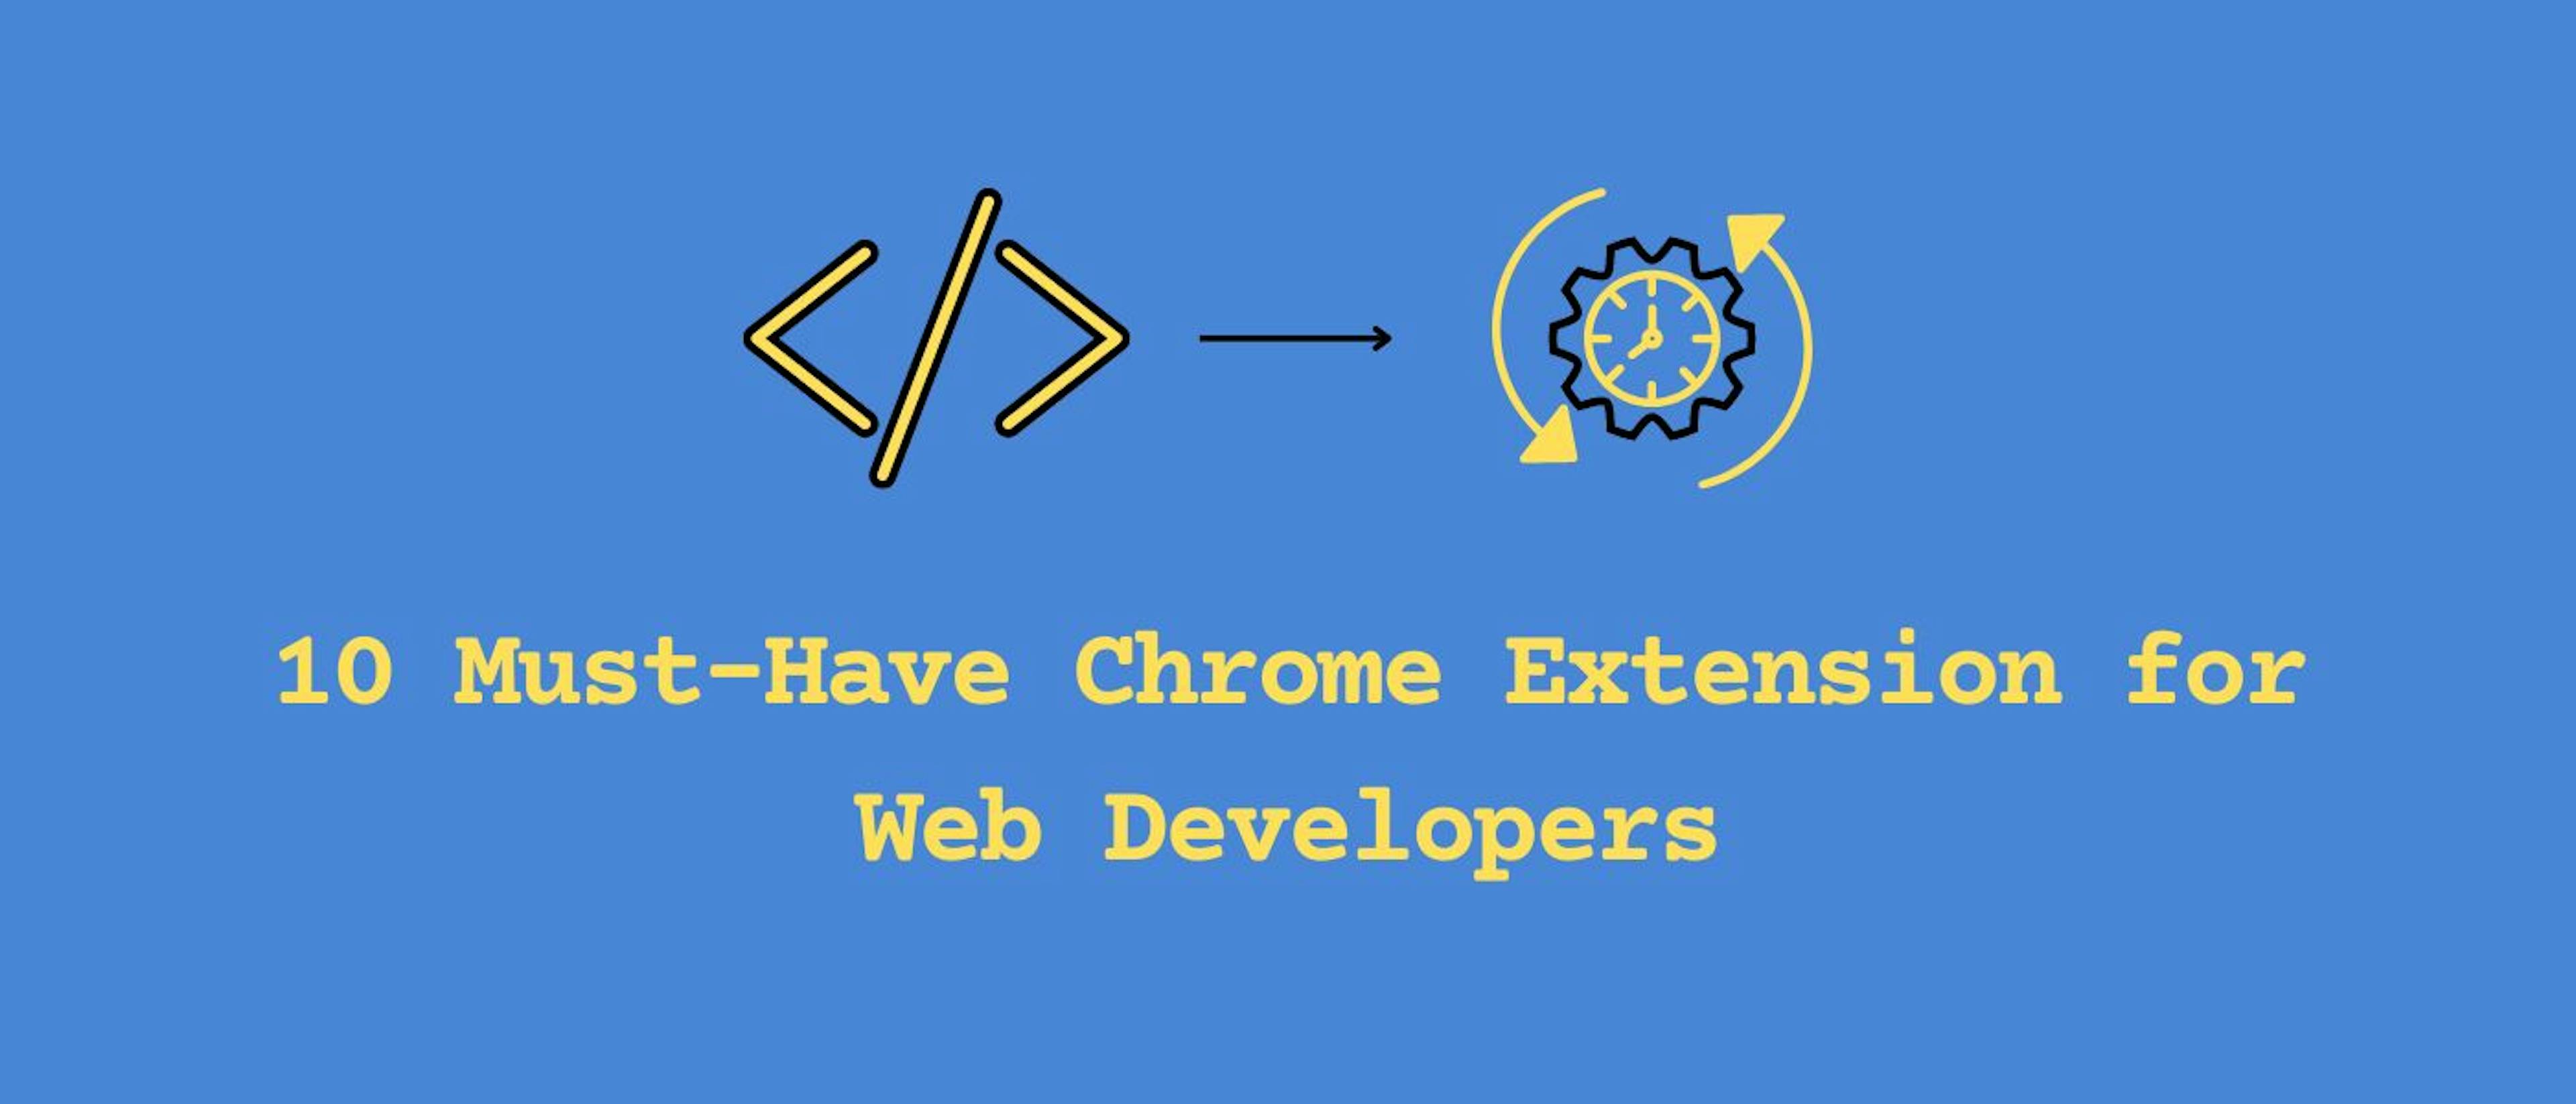 featured image - 10 Must Have Chrome Extensions for a Web Developer